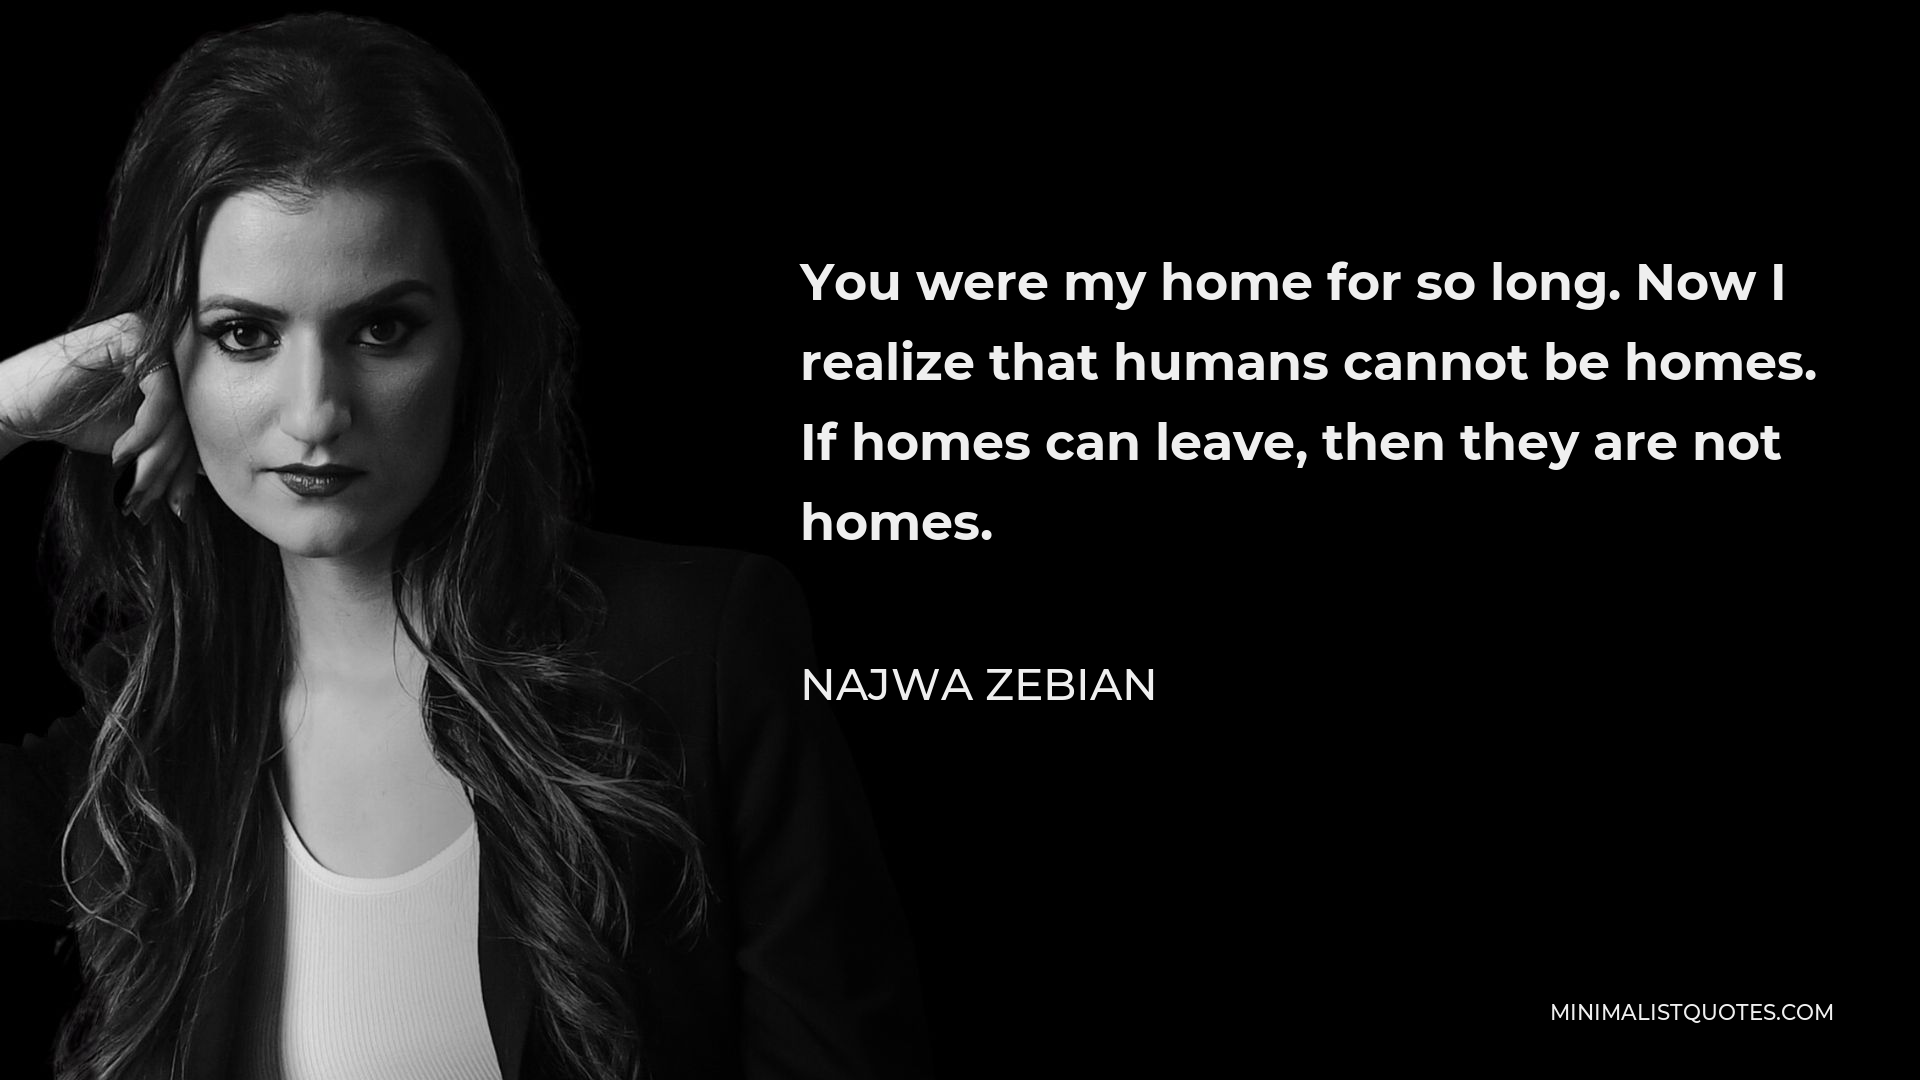 Najwa Zebian Quote - You were my home for so long. Now I realize that humans cannot be homes. If homes can leave, then they are not homes.